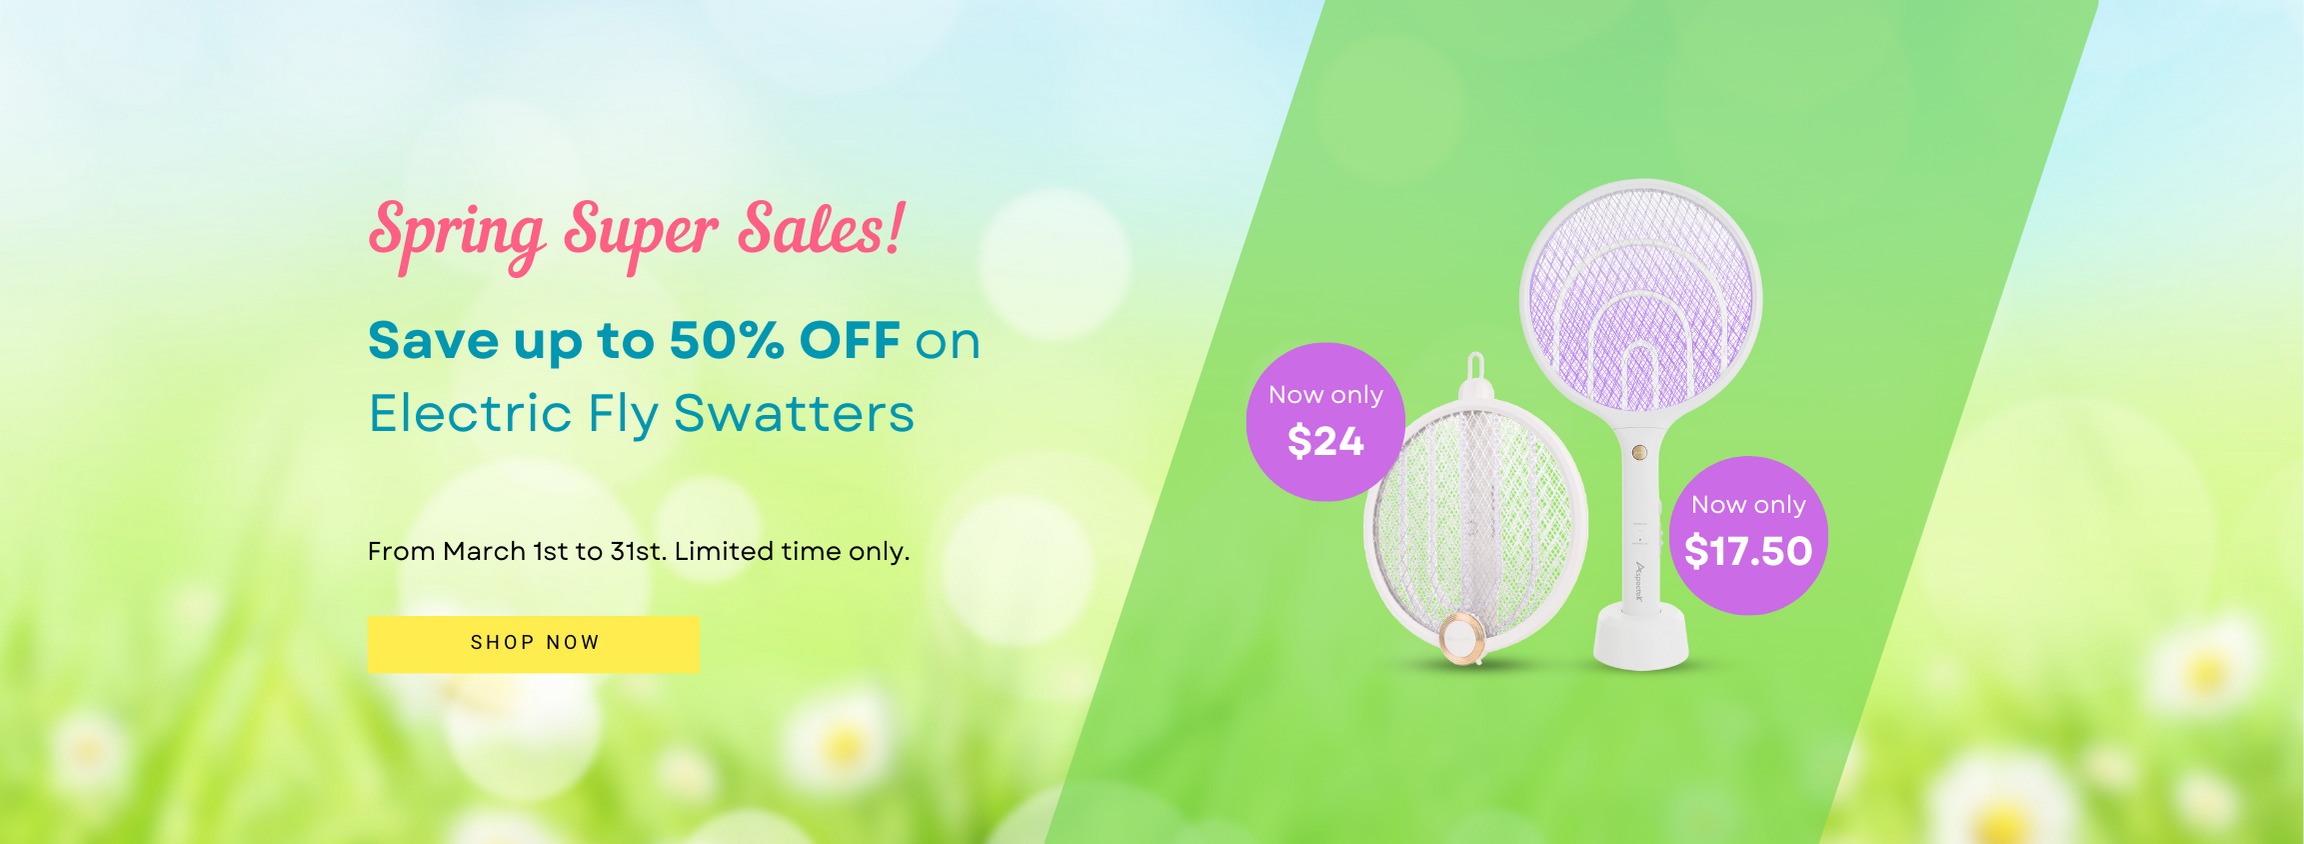 spring_sales_-_fly_swatter.png